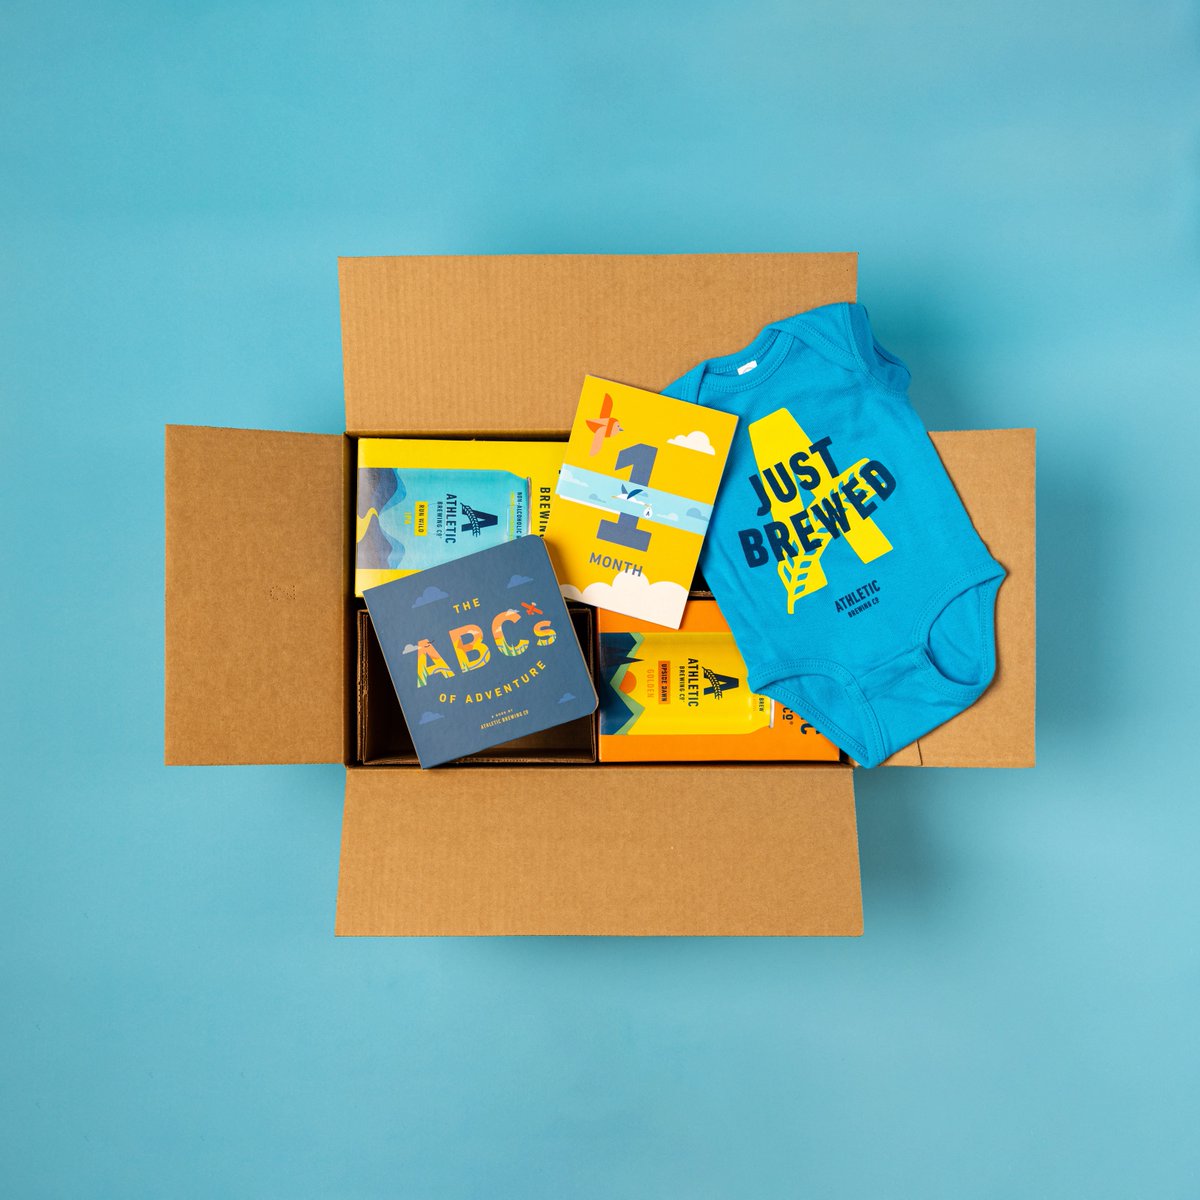 Looking for a gift for brew-loving parents? Check out our Stork Bundle! It's a special mix pack of NA brews plus a few extra gifts for their new pint sized person. Shop now for Mother's Day at athleticbrewing.com 💙